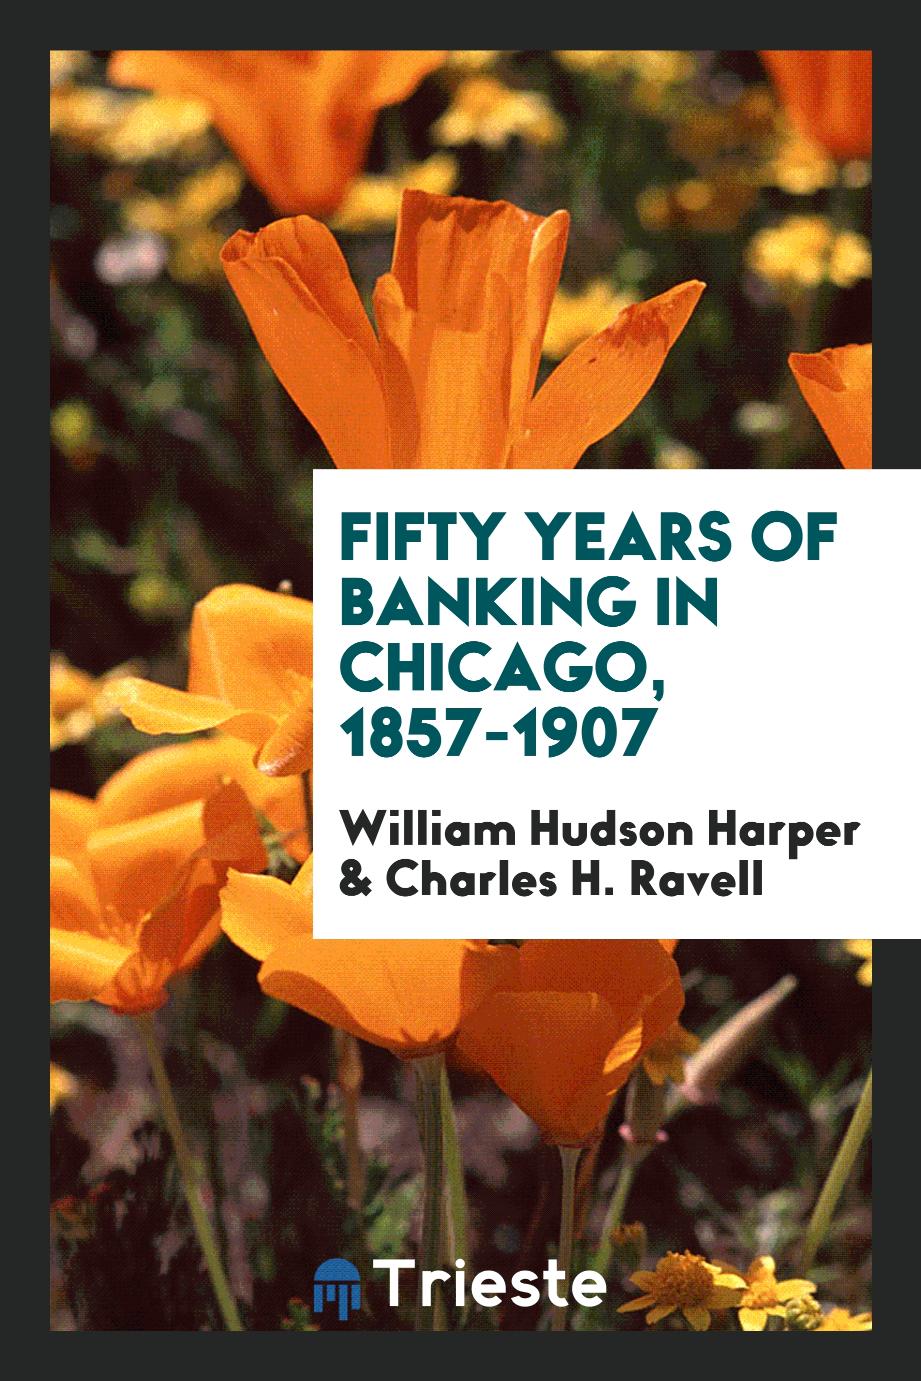 Fifty years of banking in Chicago, 1857-1907